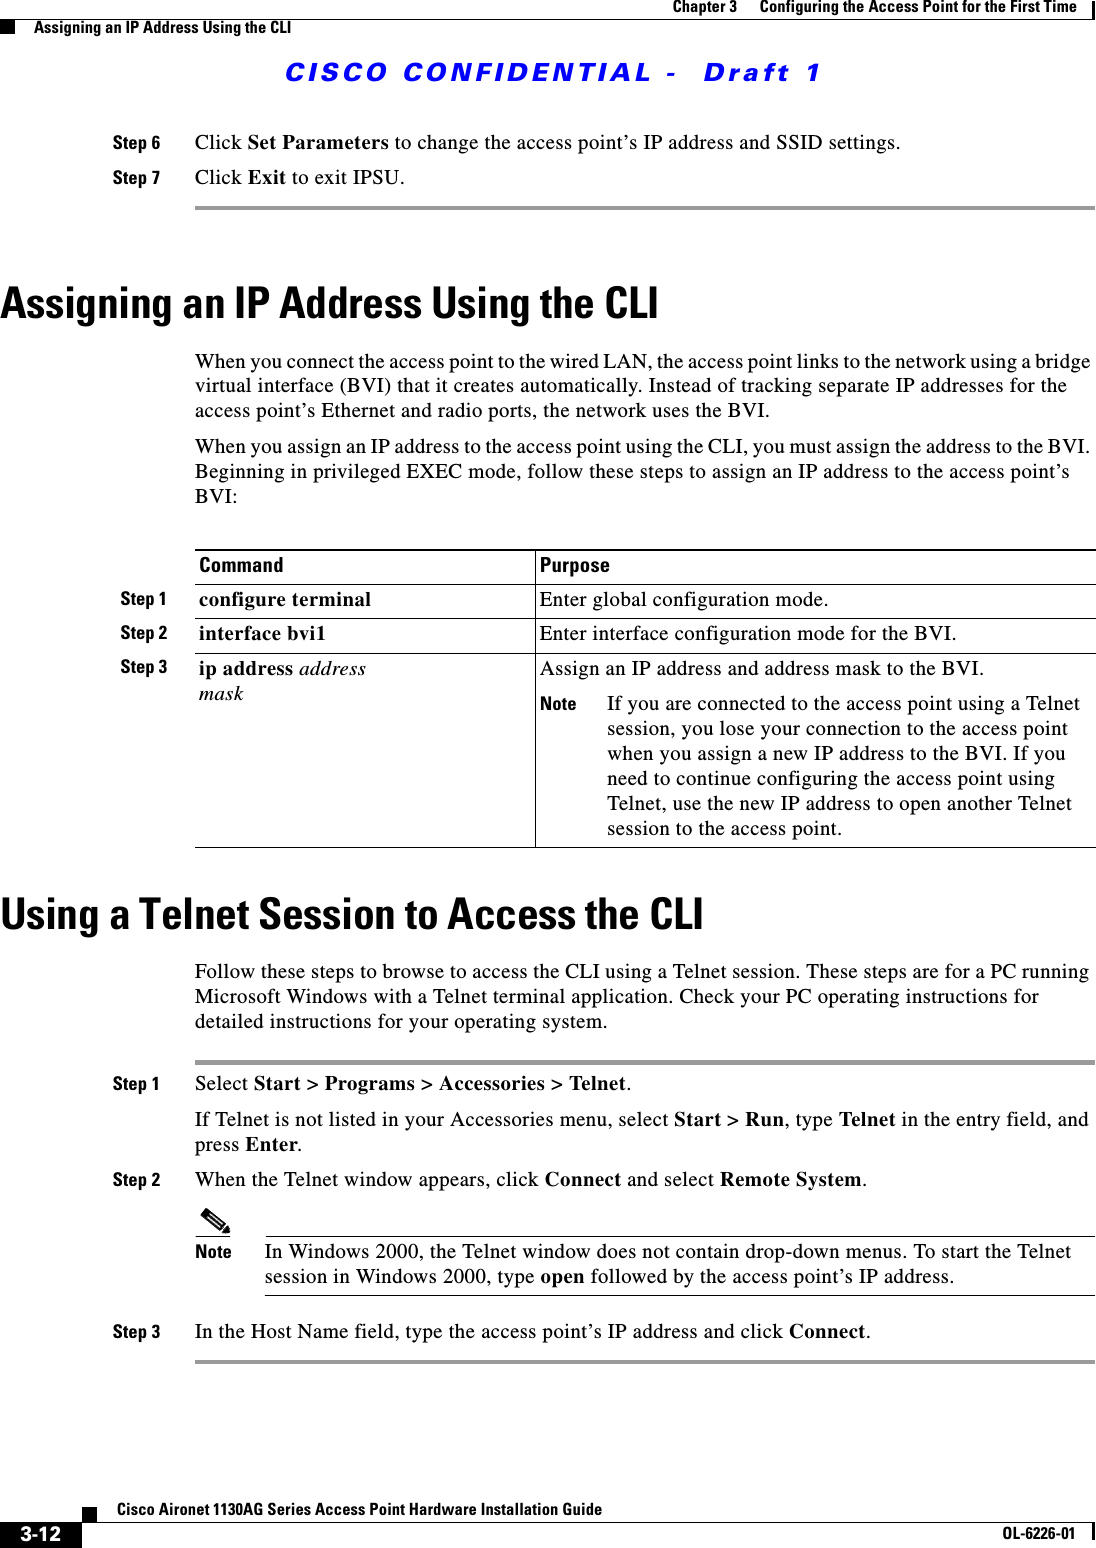  CISCO CONFIDENTIAL -  Draft 13-12Cisco Aironet 1130AG Series Access Point Hardware Installation GuideOL-6226-01Chapter 3      Configuring the Access Point for the First TimeAssigning an IP Address Using the CLIStep 6 Click Set Parameters to change the access point’s IP address and SSID settings.Step 7 Click Exit to exit IPSU. Assigning an IP Address Using the CLIWhen you connect the access point to the wired LAN, the access point links to the network using a bridge virtual interface (BVI) that it creates automatically. Instead of tracking separate IP addresses for the access point’s Ethernet and radio ports, the network uses the BVI.When you assign an IP address to the access point using the CLI, you must assign the address to the BVI. Beginning in privileged EXEC mode, follow these steps to assign an IP address to the access point’s BVI:Using a Telnet Session to Access the CLIFollow these steps to browse to access the CLI using a Telnet session. These steps are for a PC running Microsoft Windows with a Telnet terminal application. Check your PC operating instructions for detailed instructions for your operating system.Step 1 Select Start &gt; Programs &gt; Accessories &gt; Telnet. If Telnet is not listed in your Accessories menu, select Start &gt; Run, type Telnet in the entry field, and press Enter. Step 2 When the Telnet window appears, click Connect and select Remote System.Note In Windows 2000, the Telnet window does not contain drop-down menus. To start the Telnet session in Windows 2000, type open followed by the access point’s IP address.Step 3 In the Host Name field, type the access point’s IP address and click Connect.Command PurposeStep 1 configure terminal Enter global configuration mode.Step 2 interface bvi1 Enter interface configuration mode for the BVI.Step 3 ip address address maskAssign an IP address and address mask to the BVI. Note If you are connected to the access point using a Telnet session, you lose your connection to the access point when you assign a new IP address to the BVI. If you need to continue configuring the access point using Telnet, use the new IP address to open another Telnet session to the access point. 